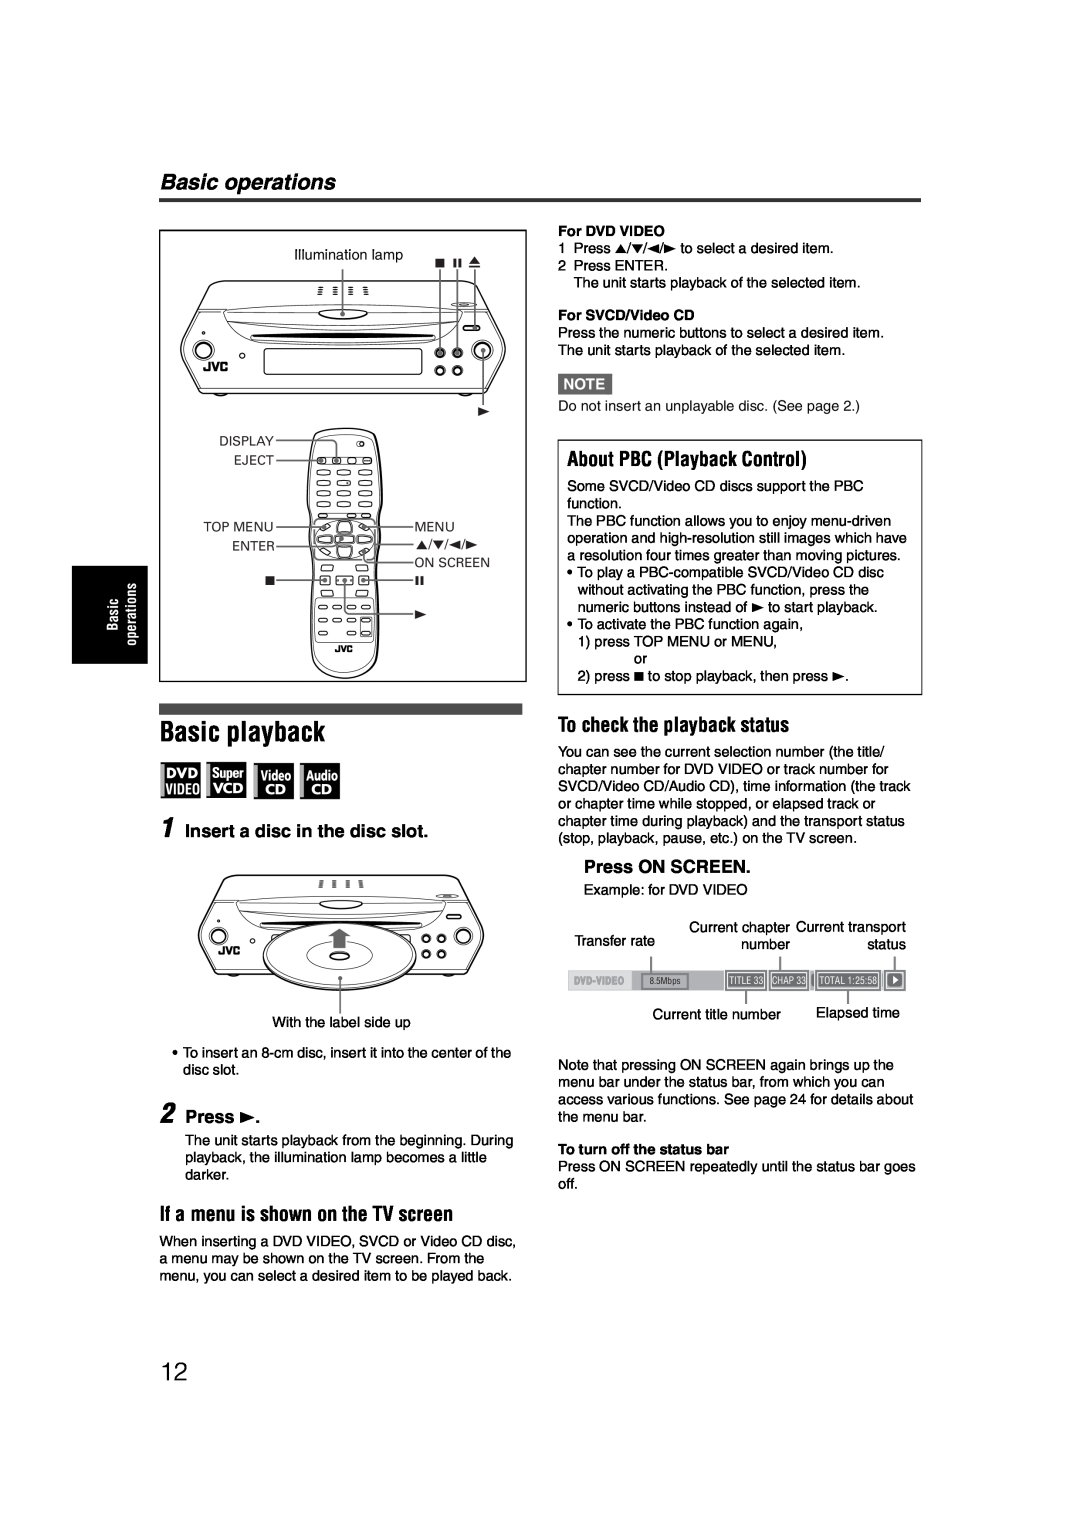 JVC LET0227-003A Basic playback, About PBC Playback Control, If a menu is shown on the TV screen, Press ON SCREEN 